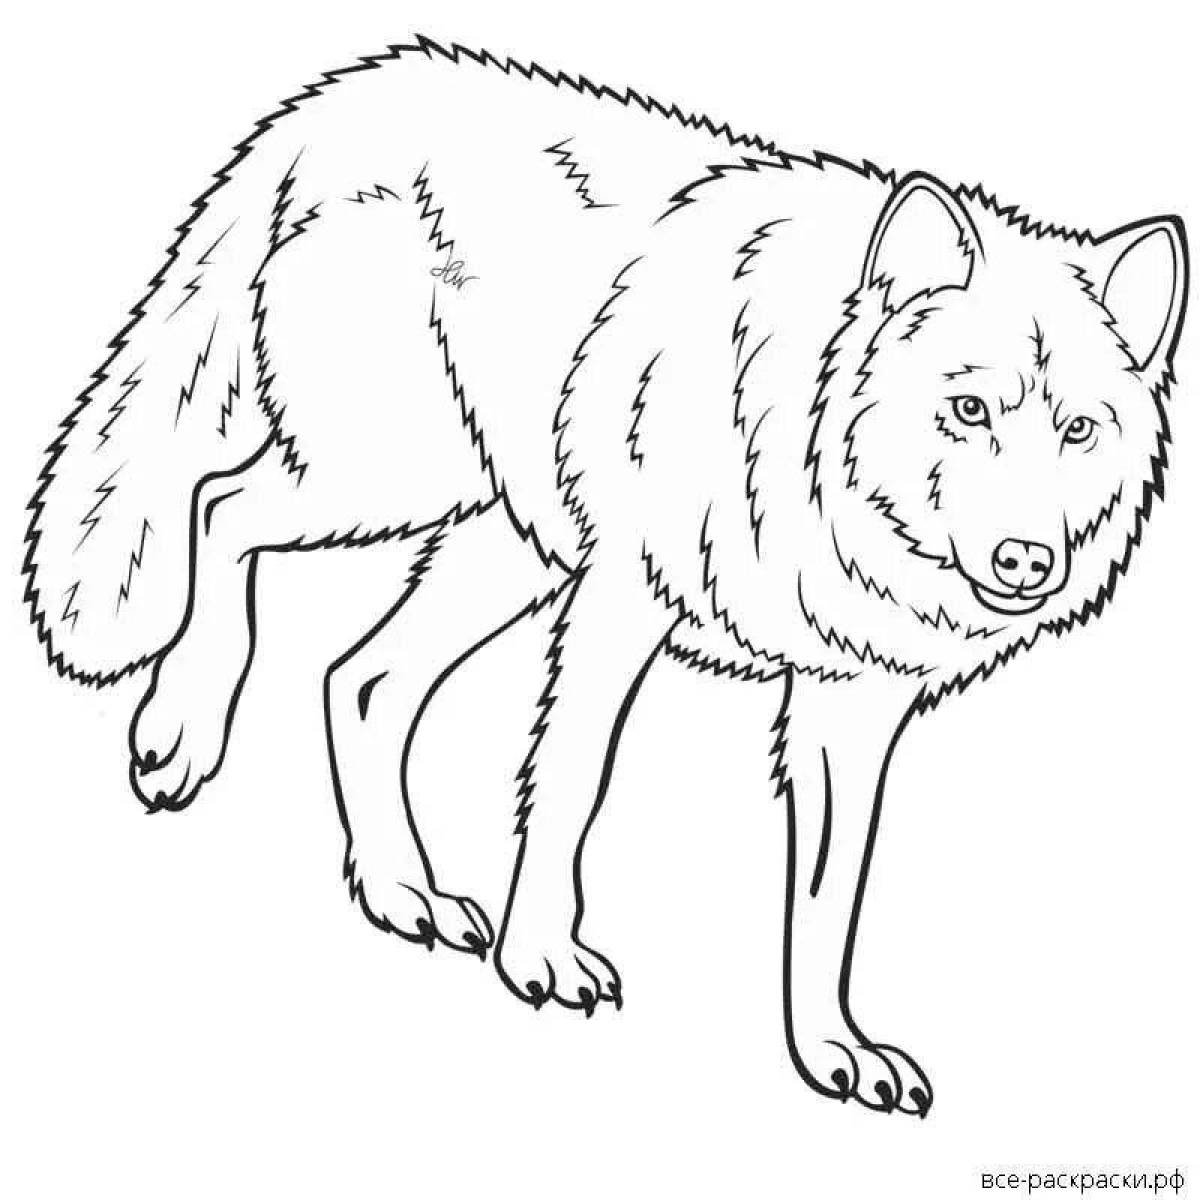 Frightening polar wolf coloring page